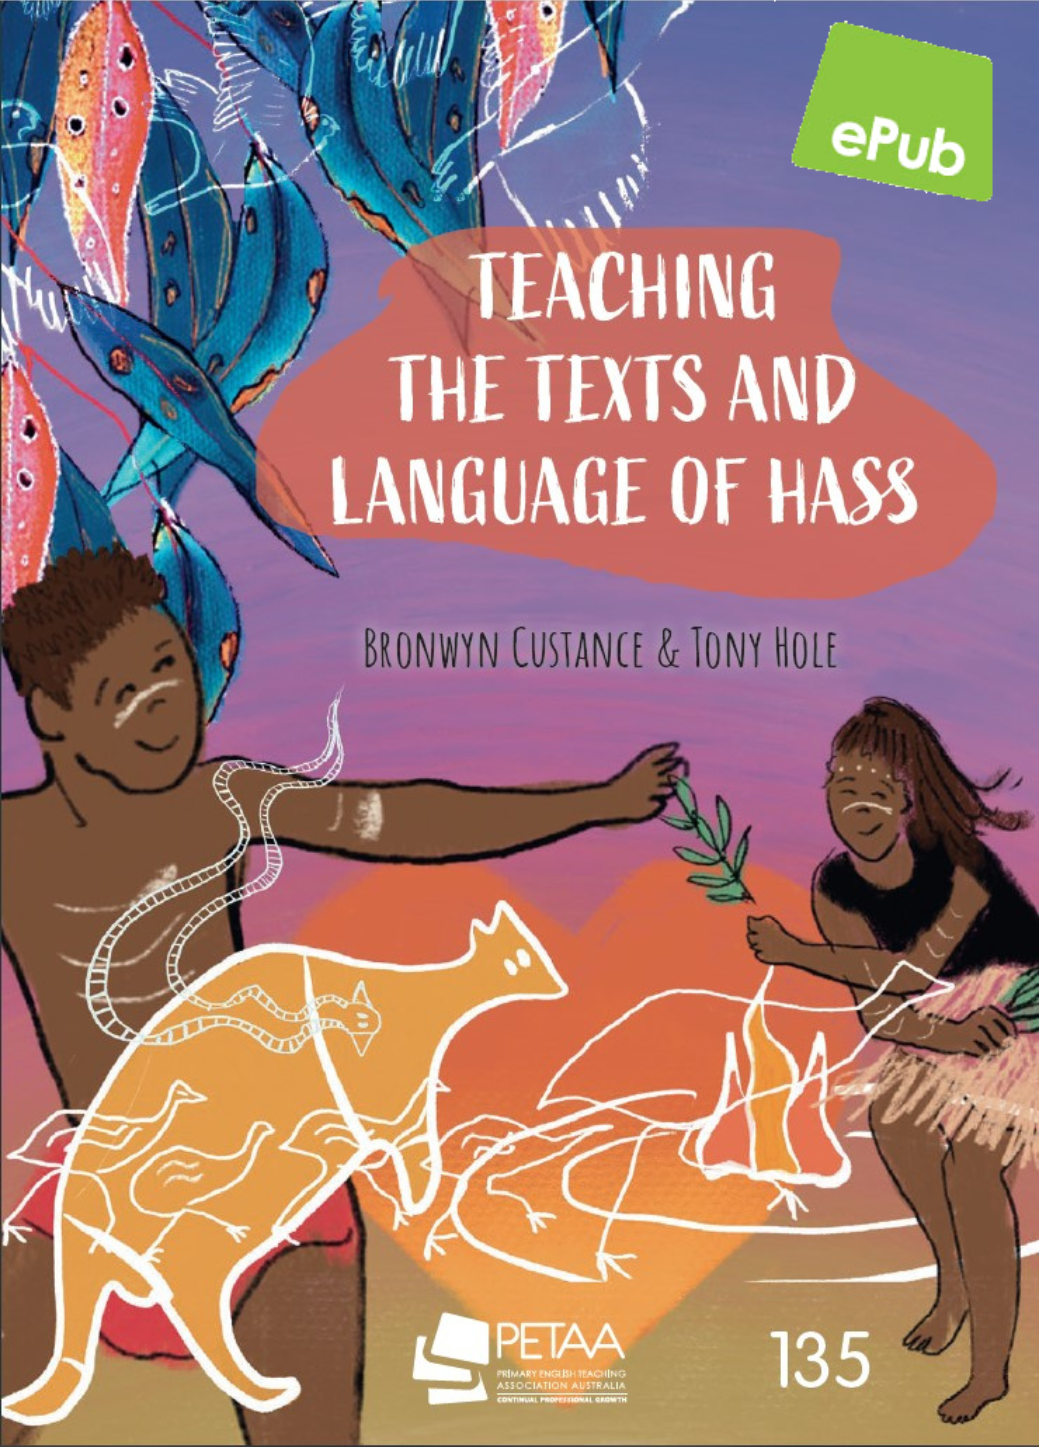 eBook - Teaching the texts and language of HASS